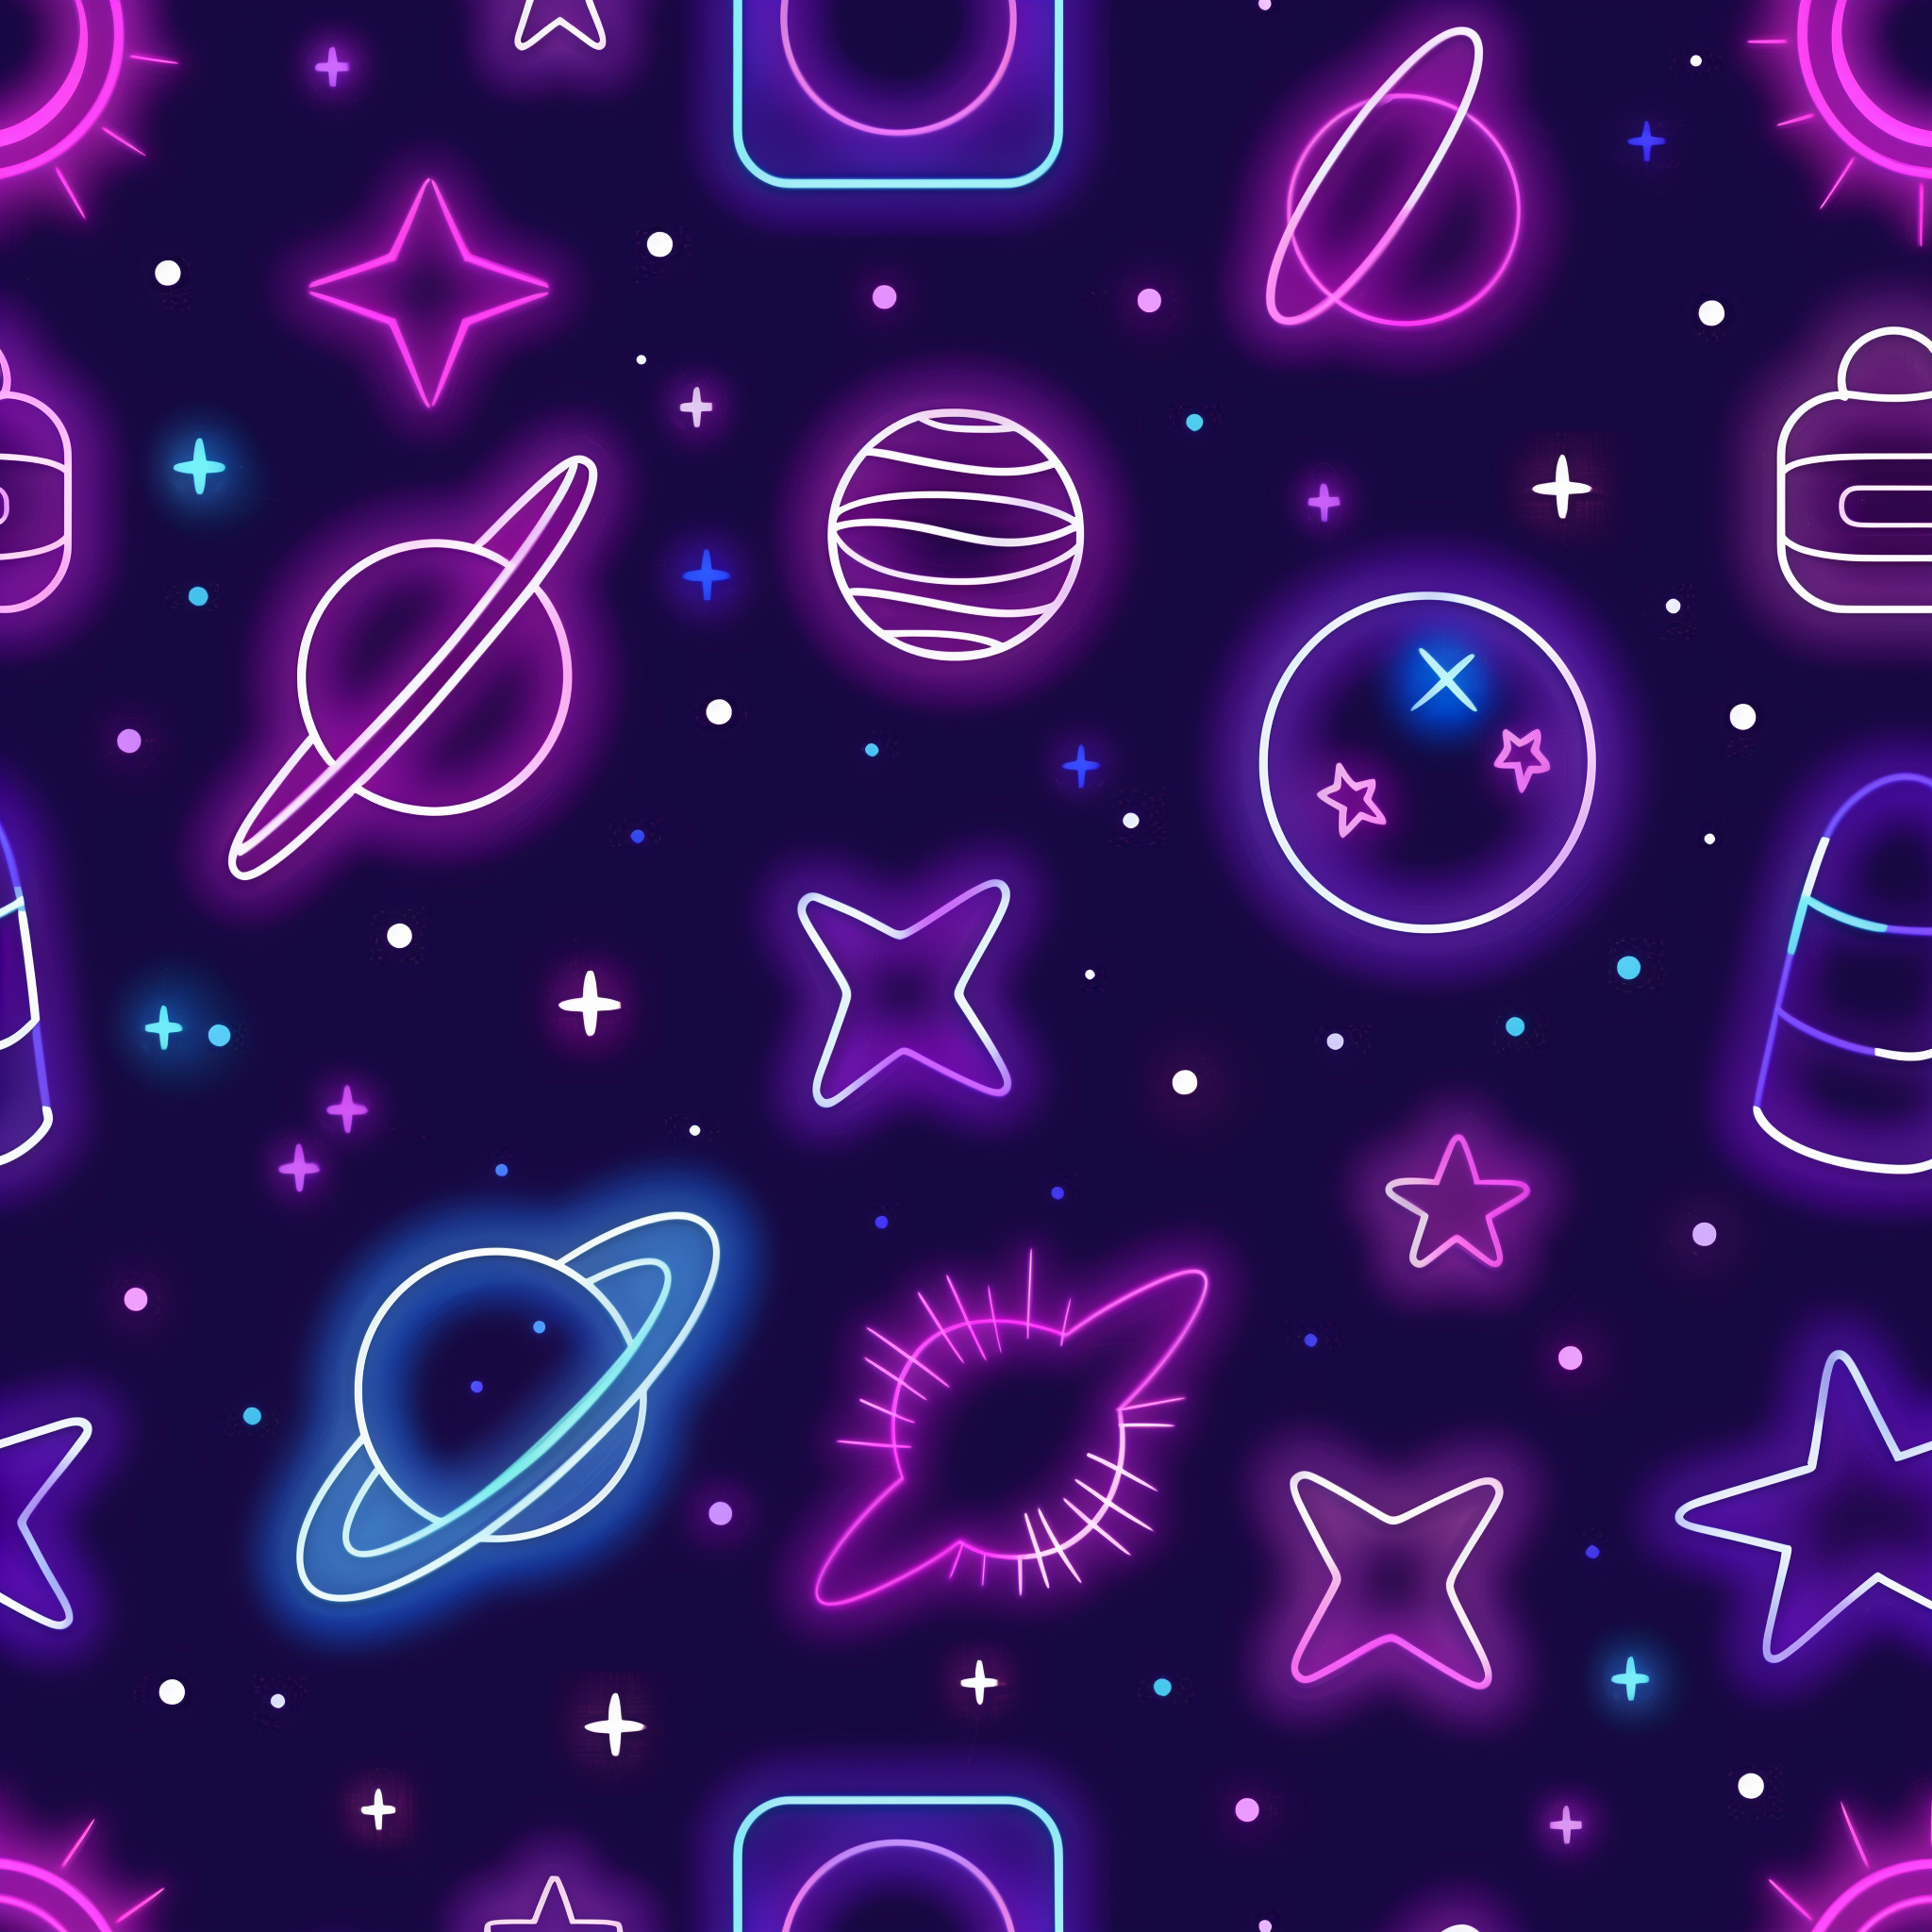 Neon space-themed avatar with glowing celestial bodies and stars on a dark background.